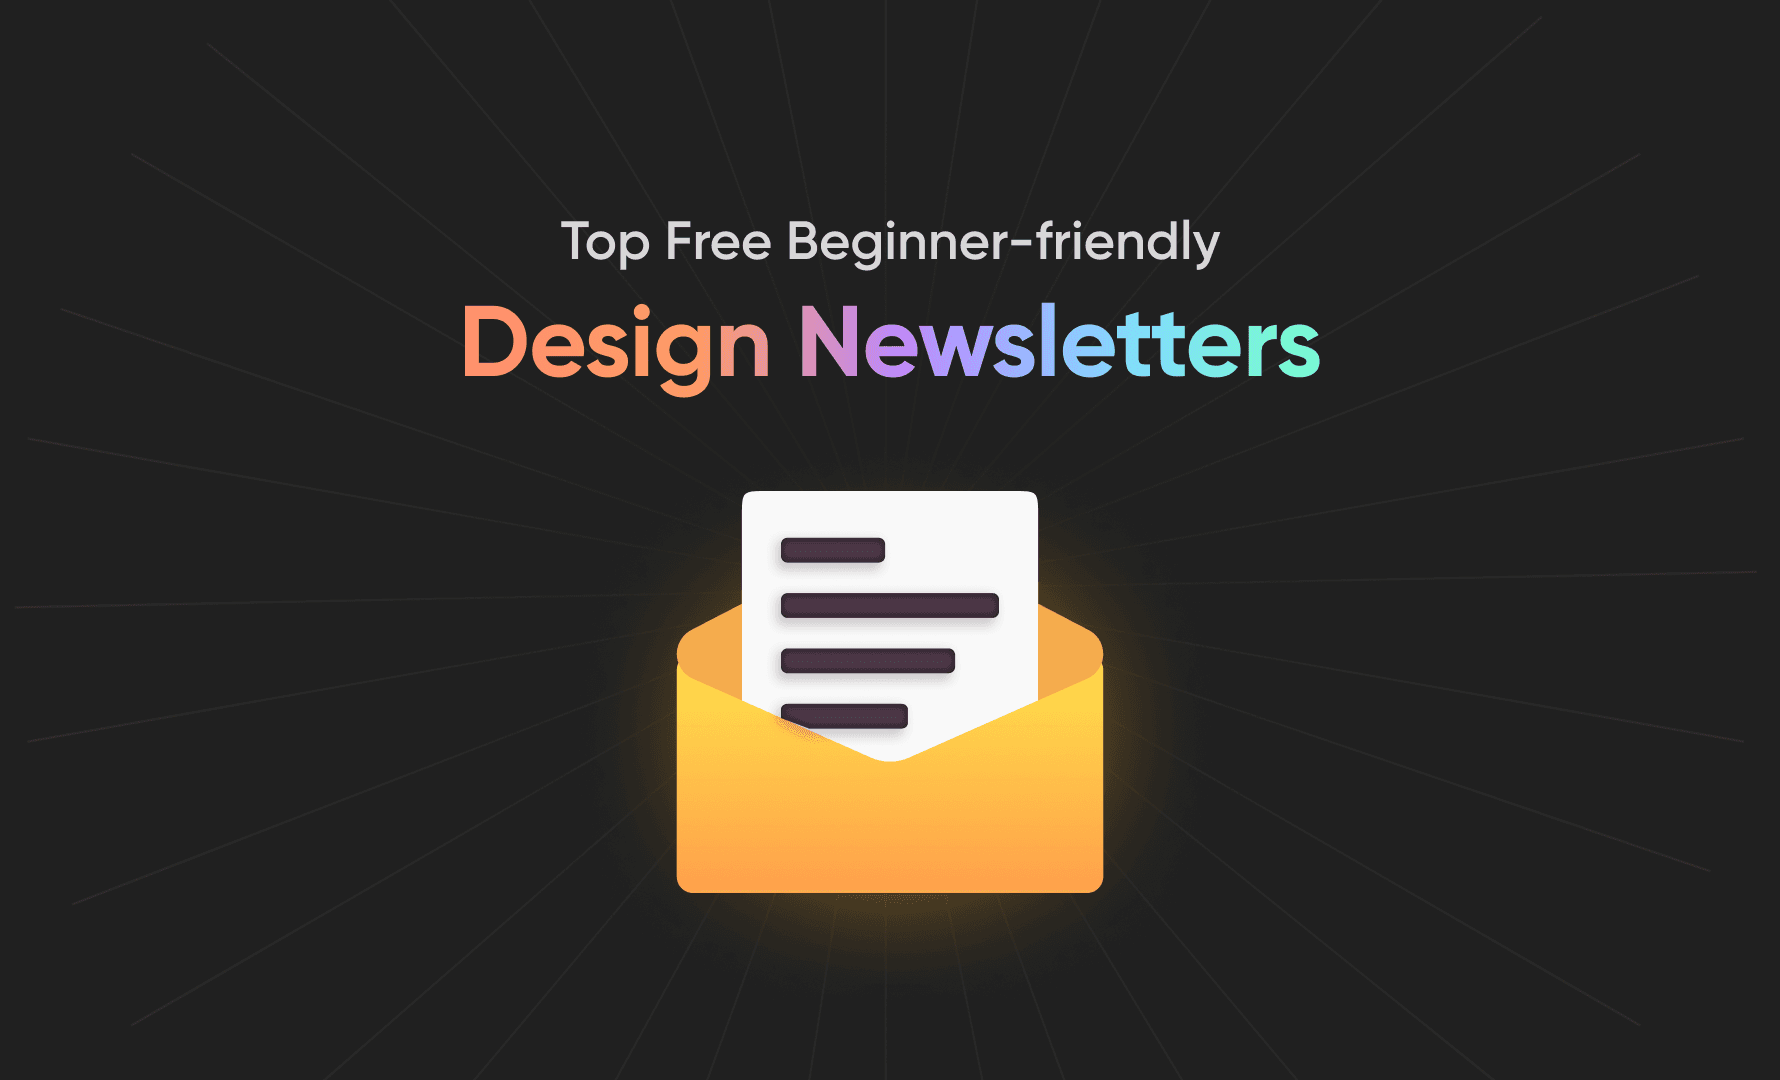 Top free design newsletters that you should subscribe to!